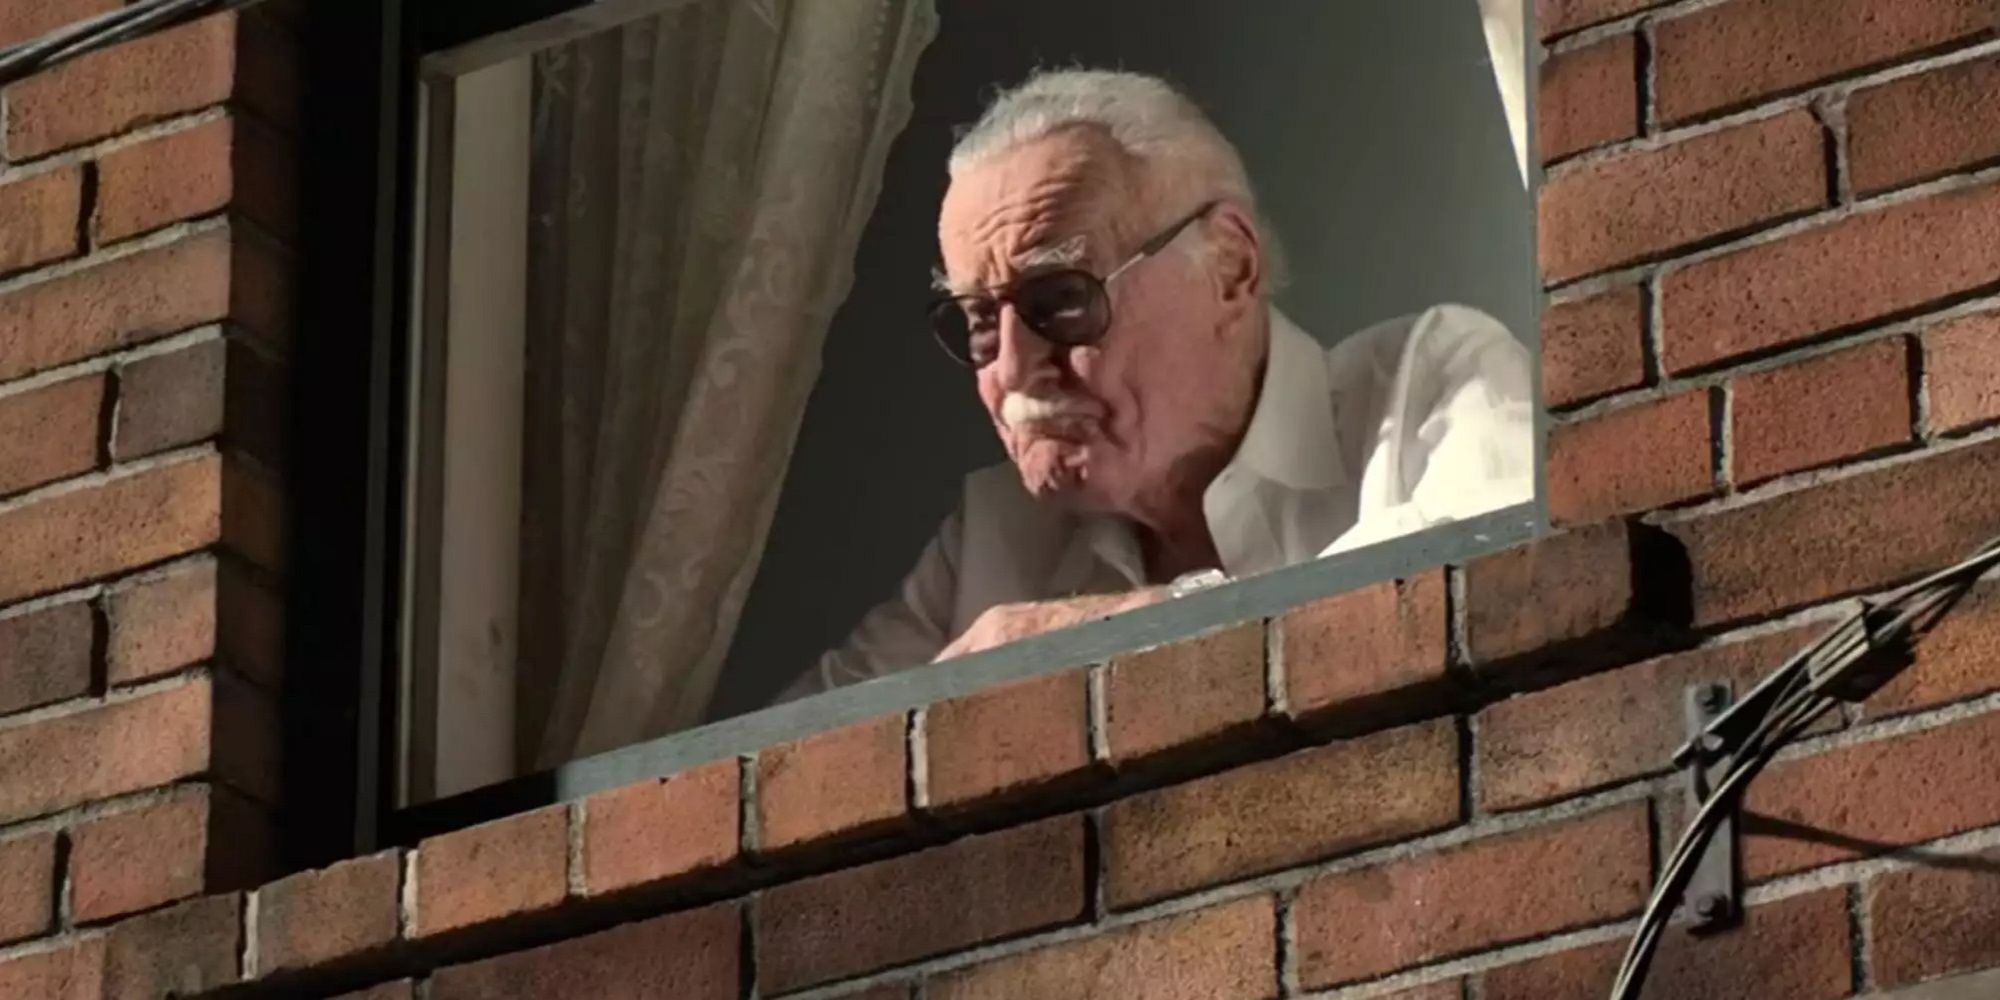 Stan Lee in Spider-Man: Homecoming